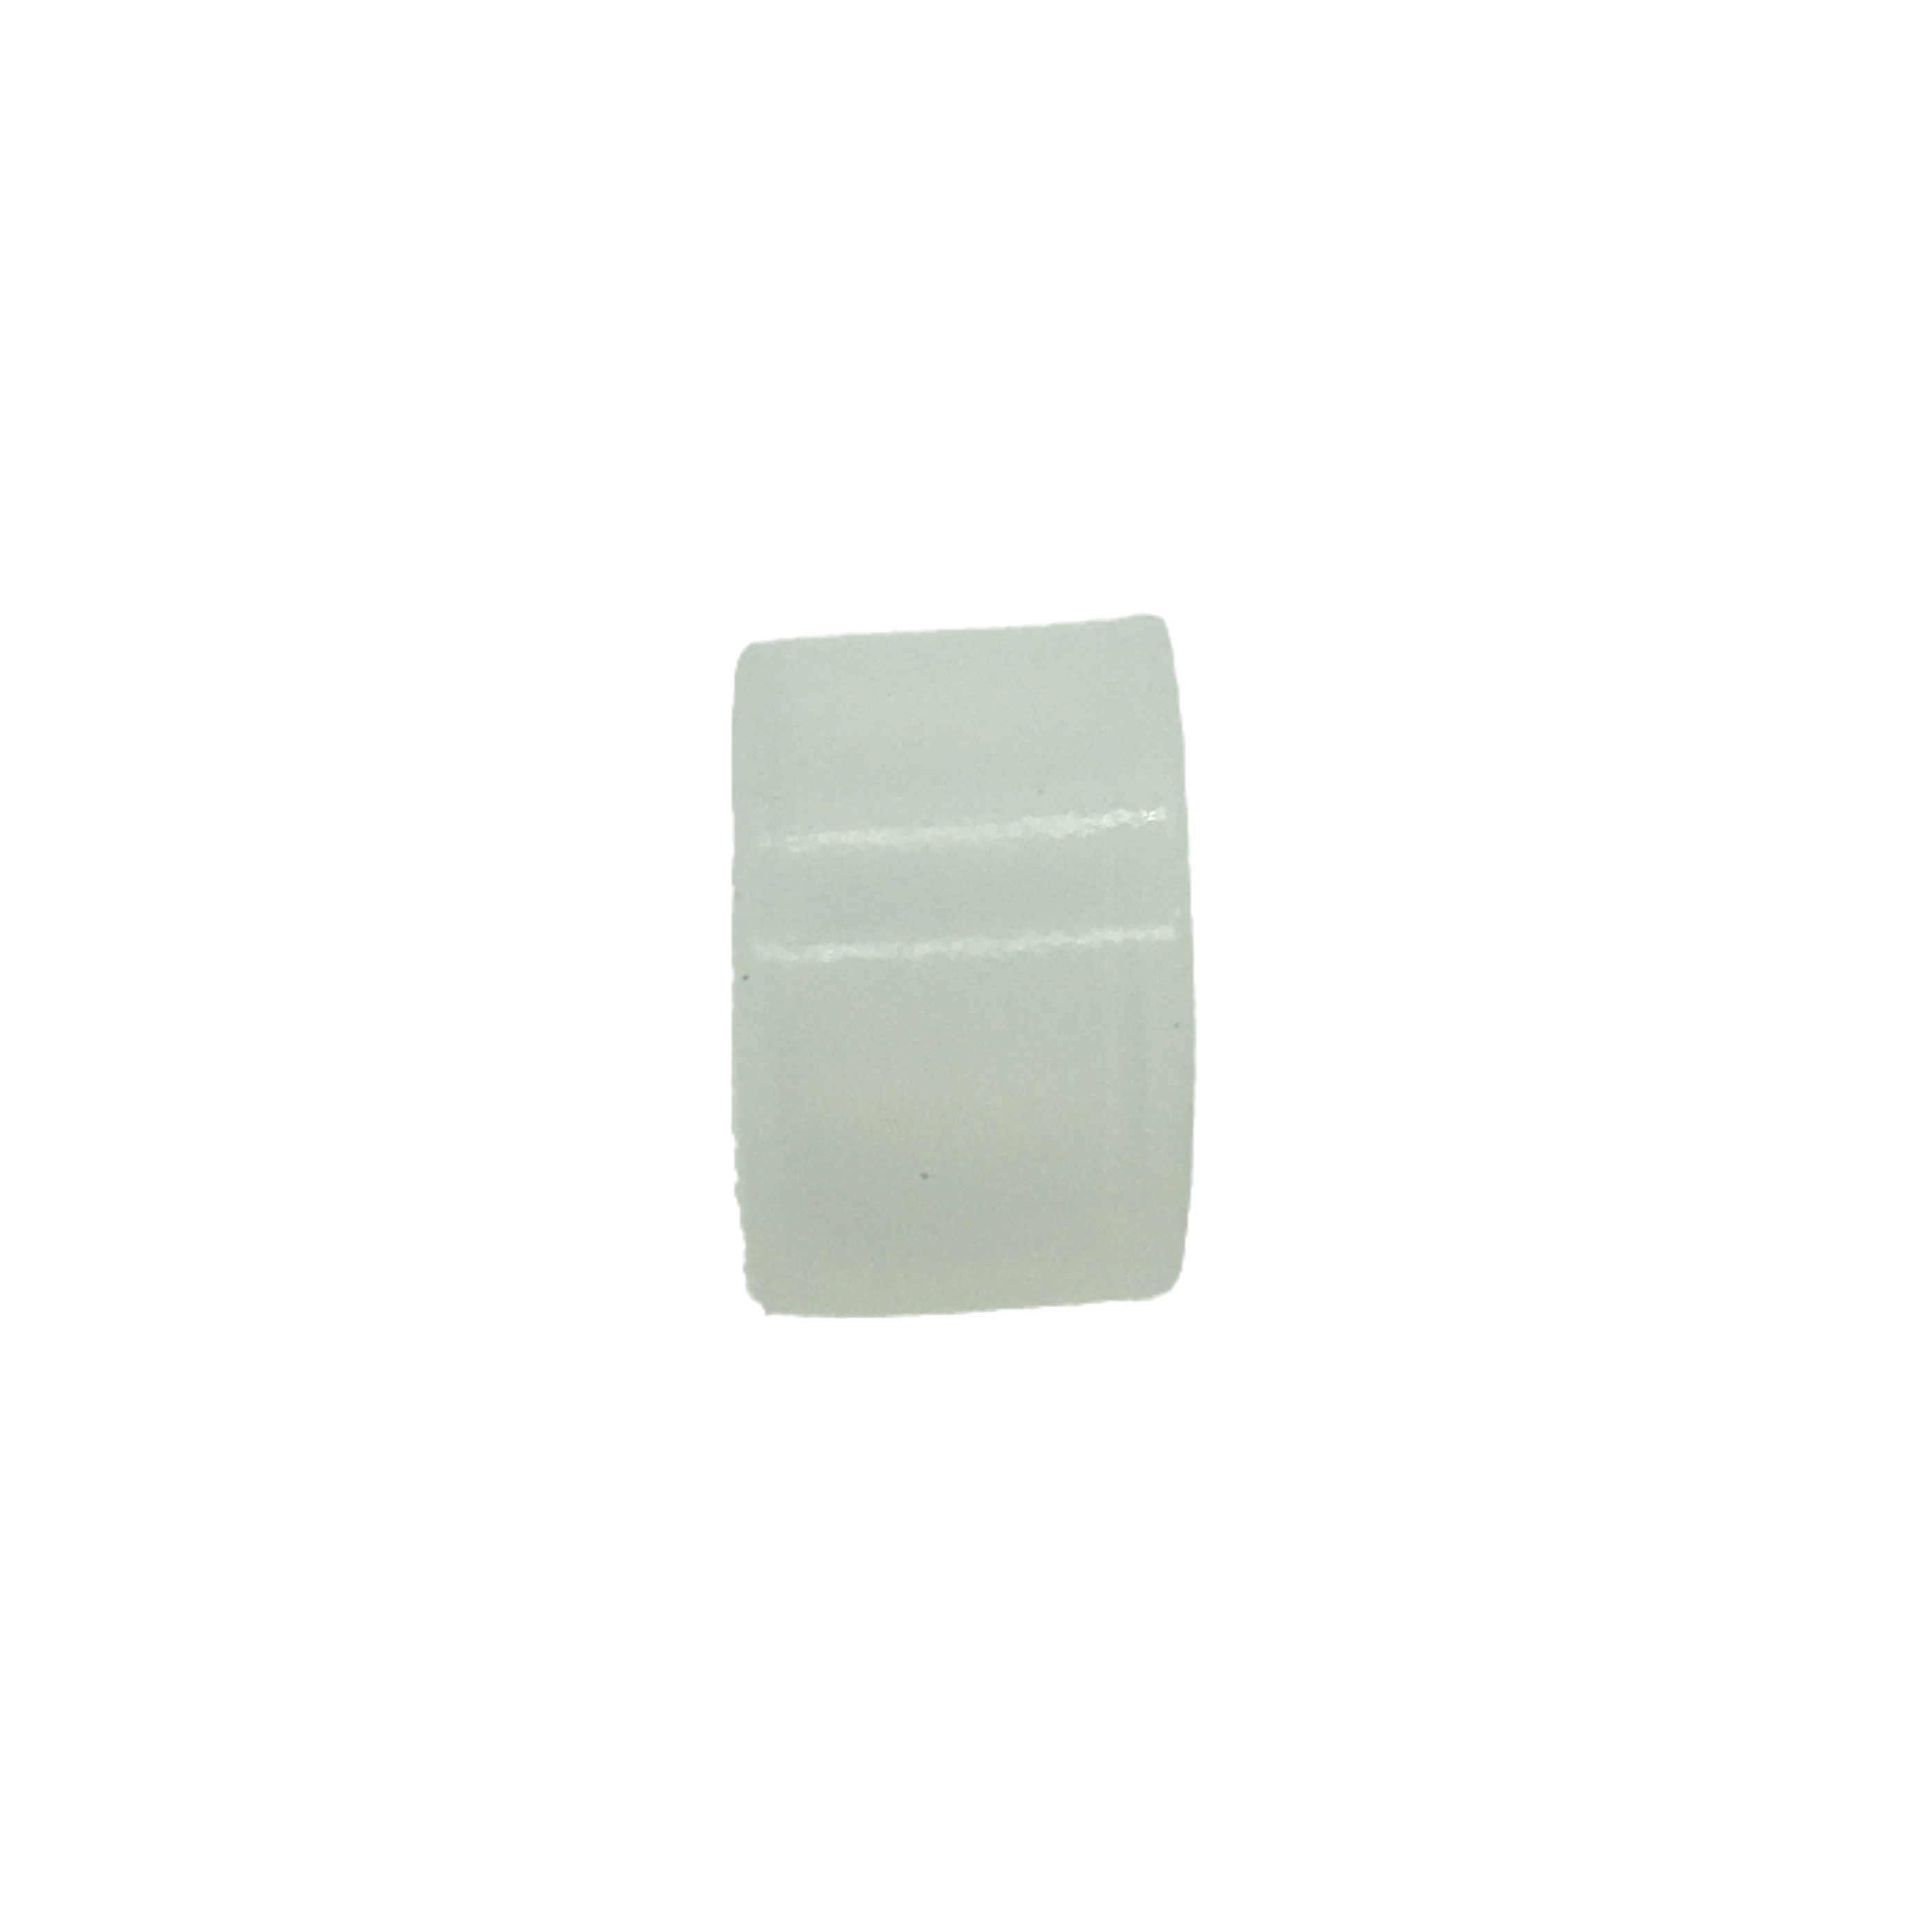 Round Silicone Sleeve 16mm Button Waterproof Cap Dustproof Switch Protective Cover Transparent White Sealing Ring